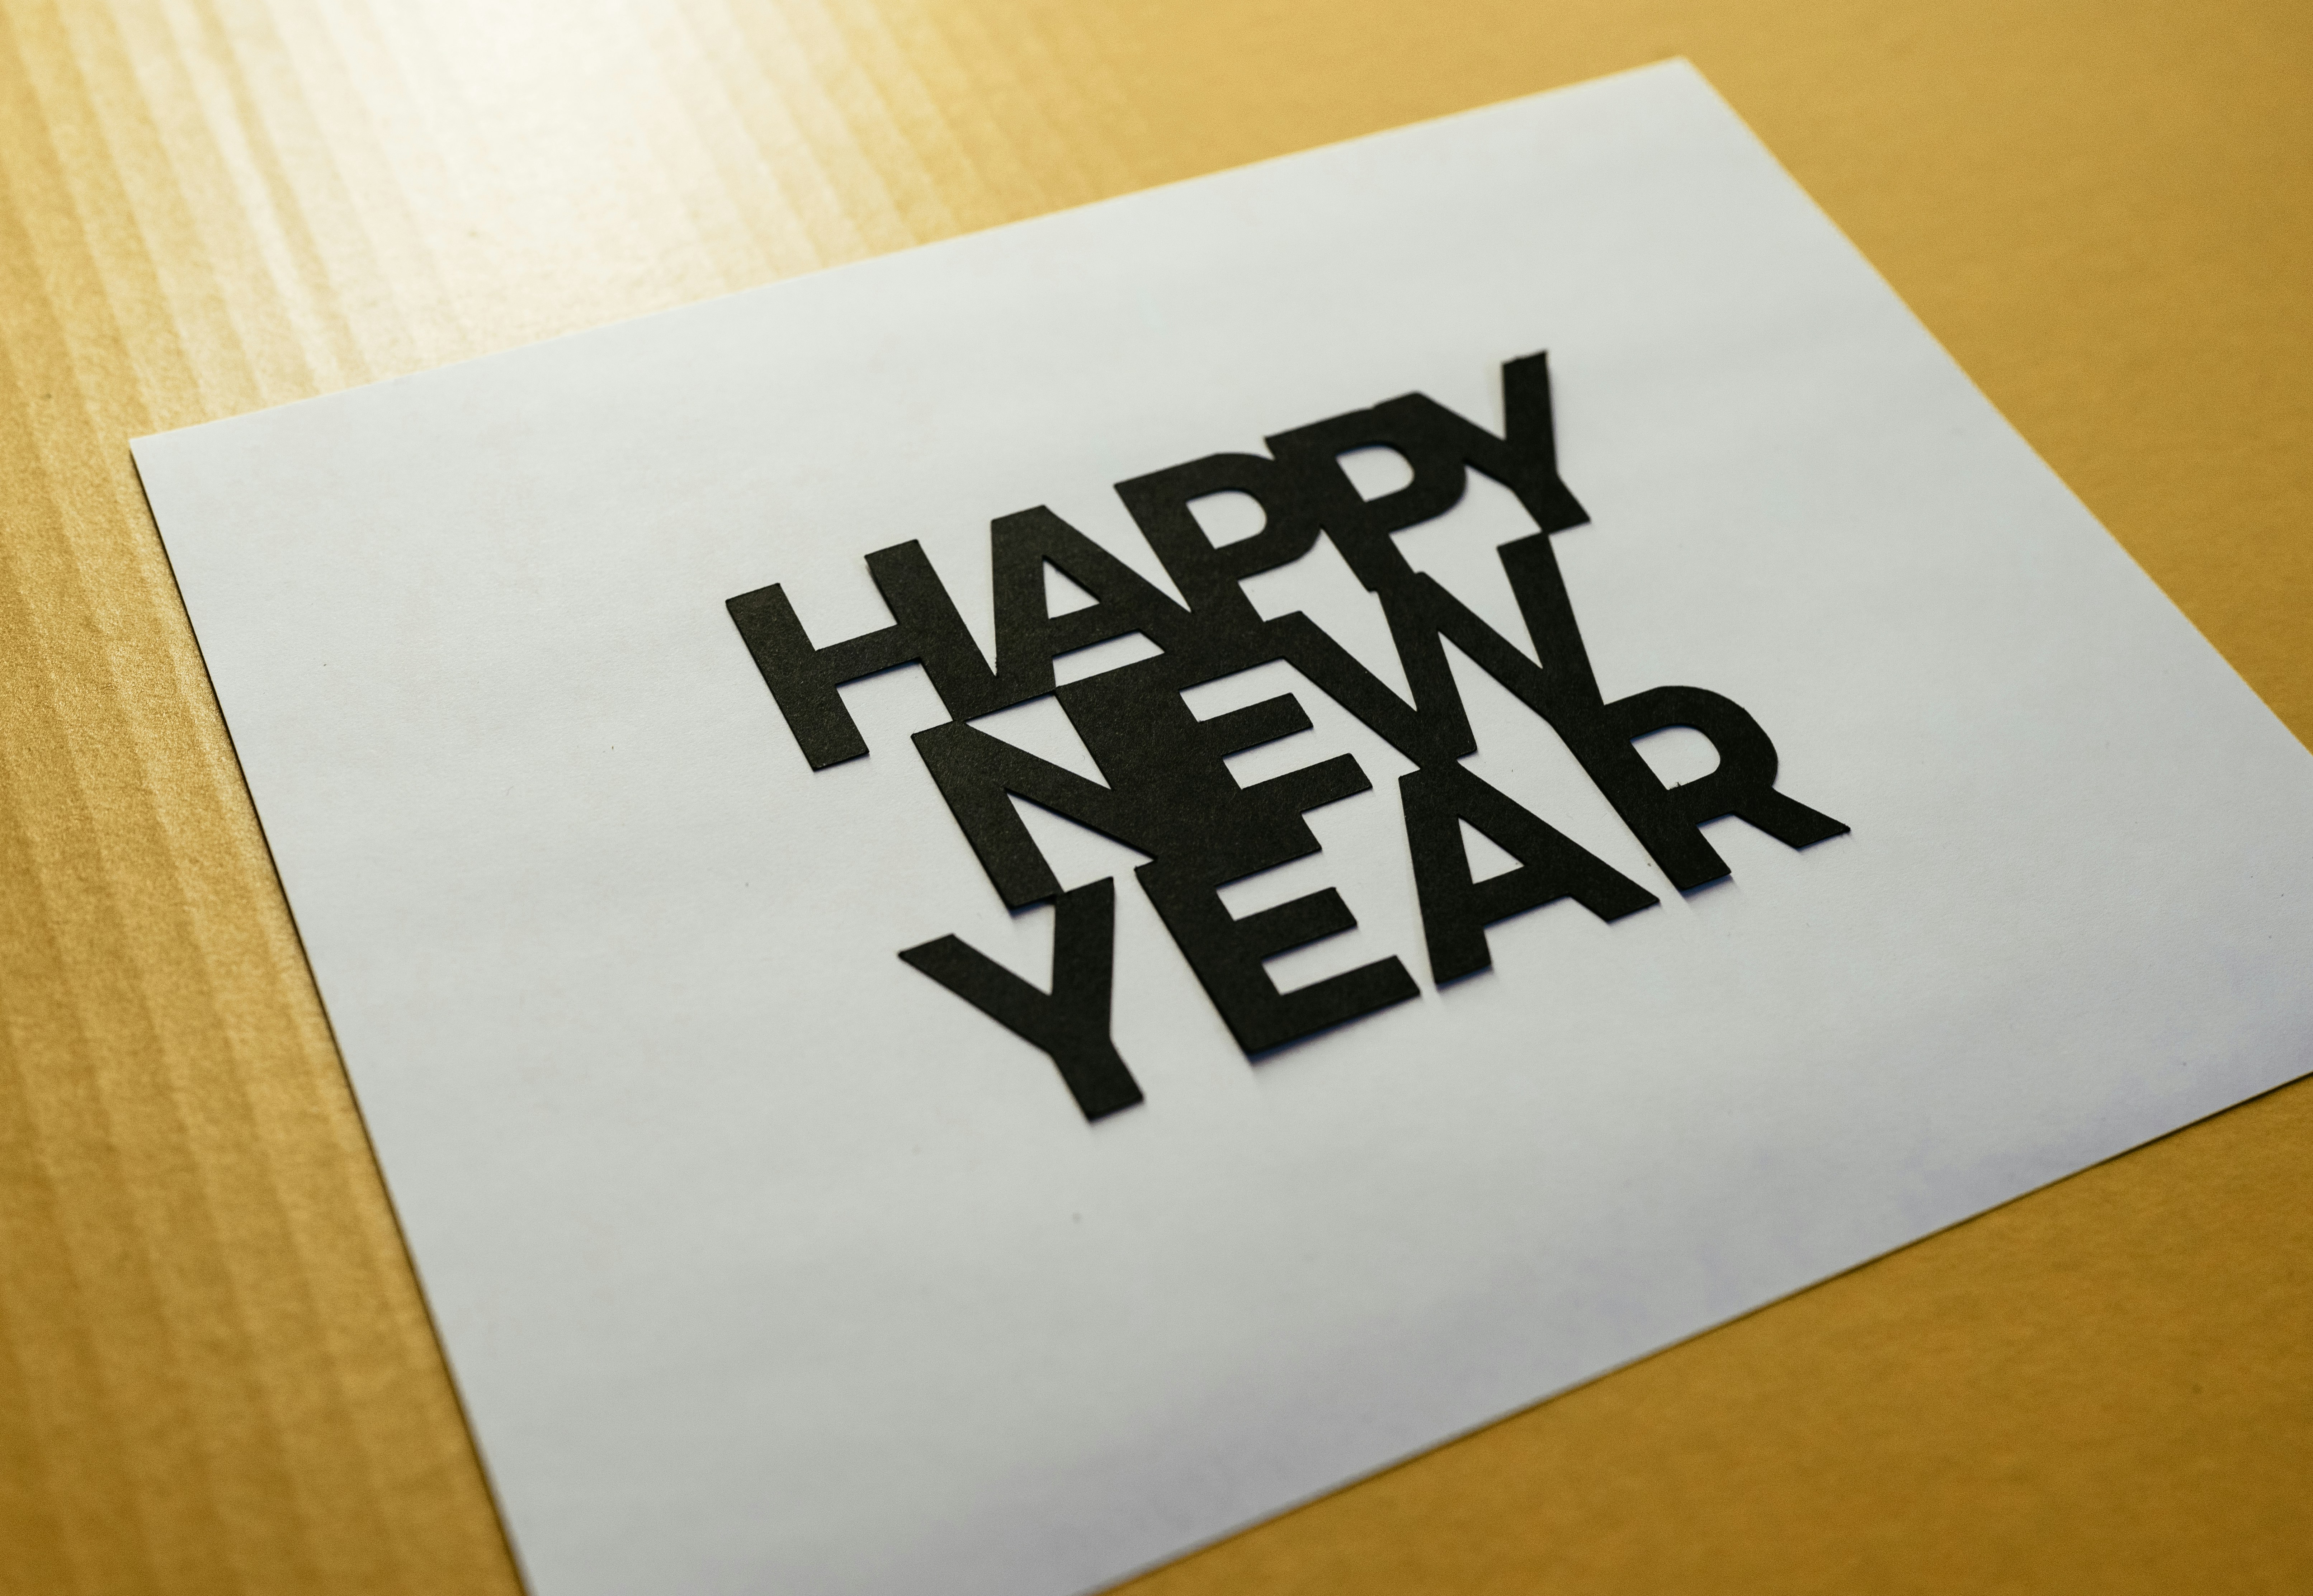 Happy New Year cut out on a piece of paper